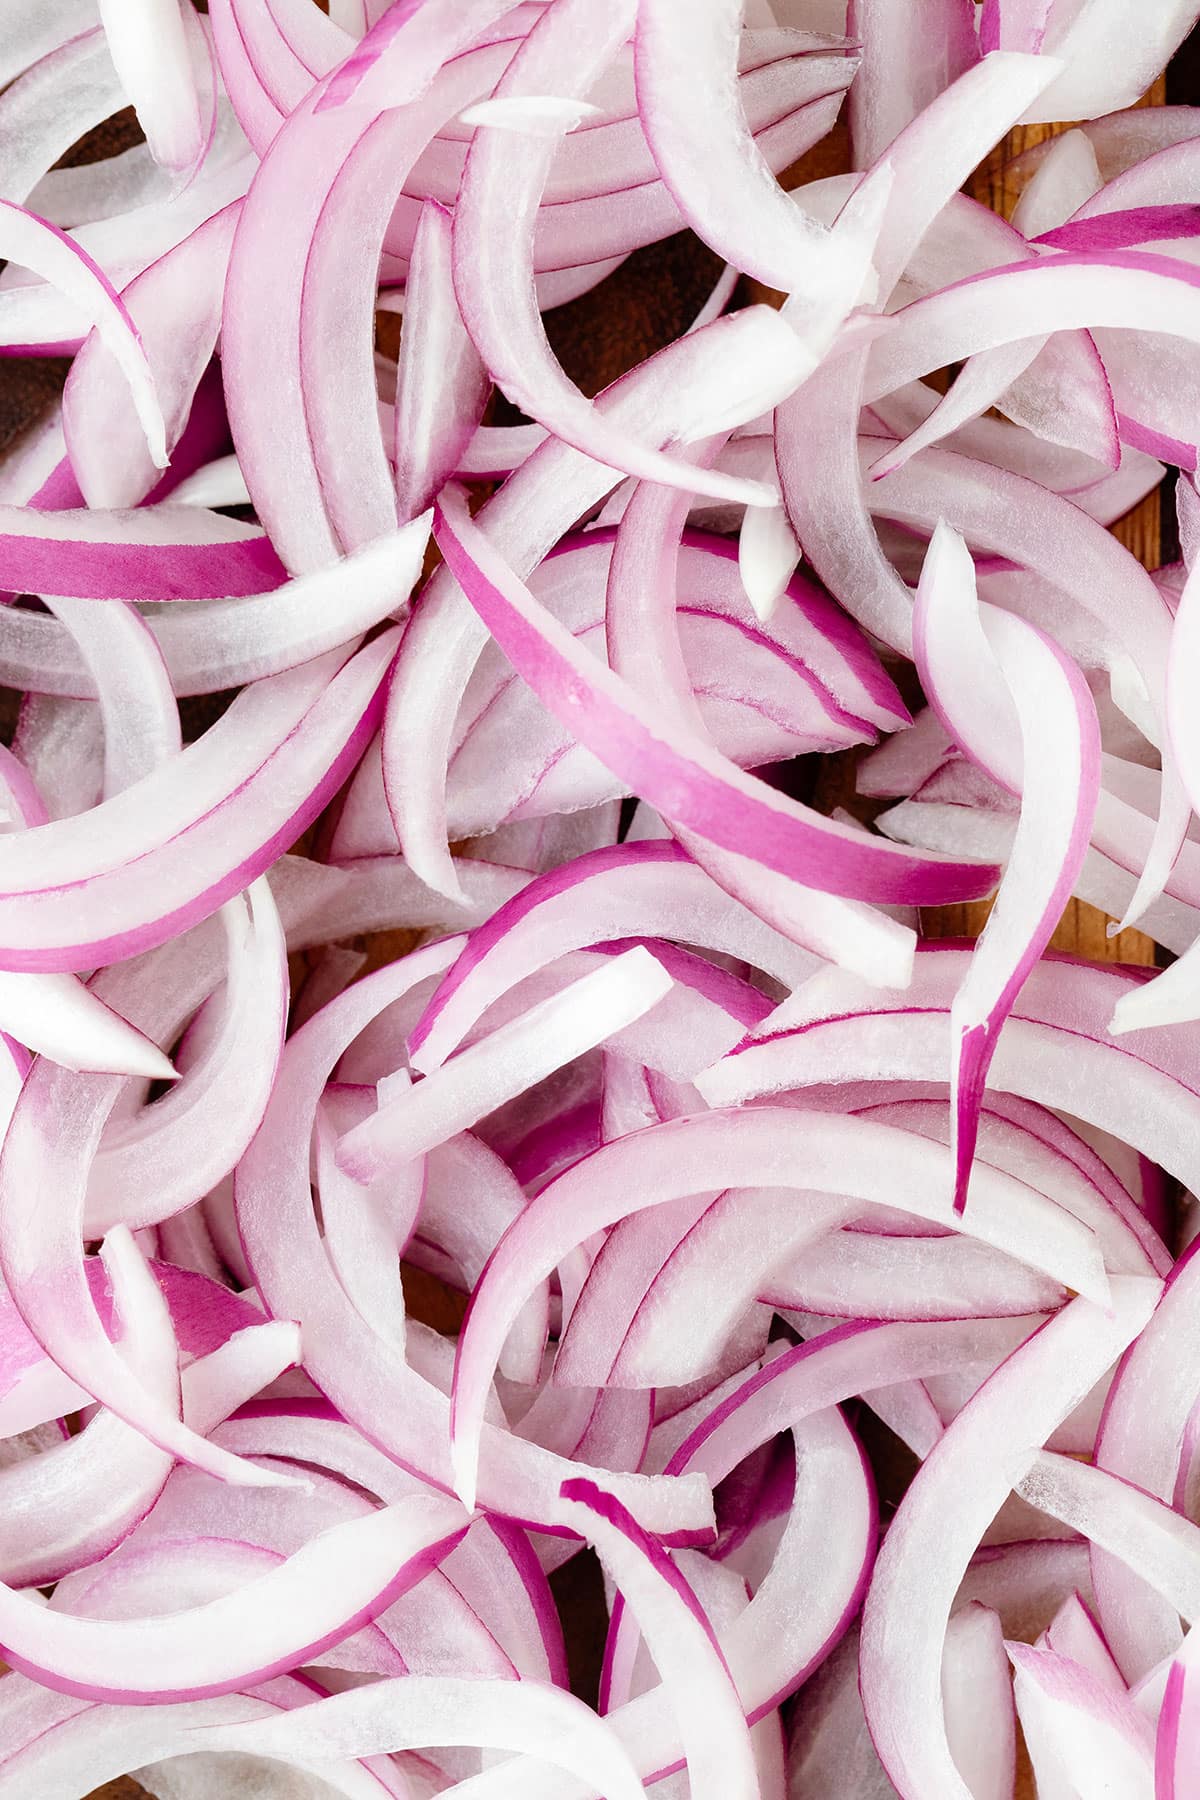 A close up photo of sliced red onion